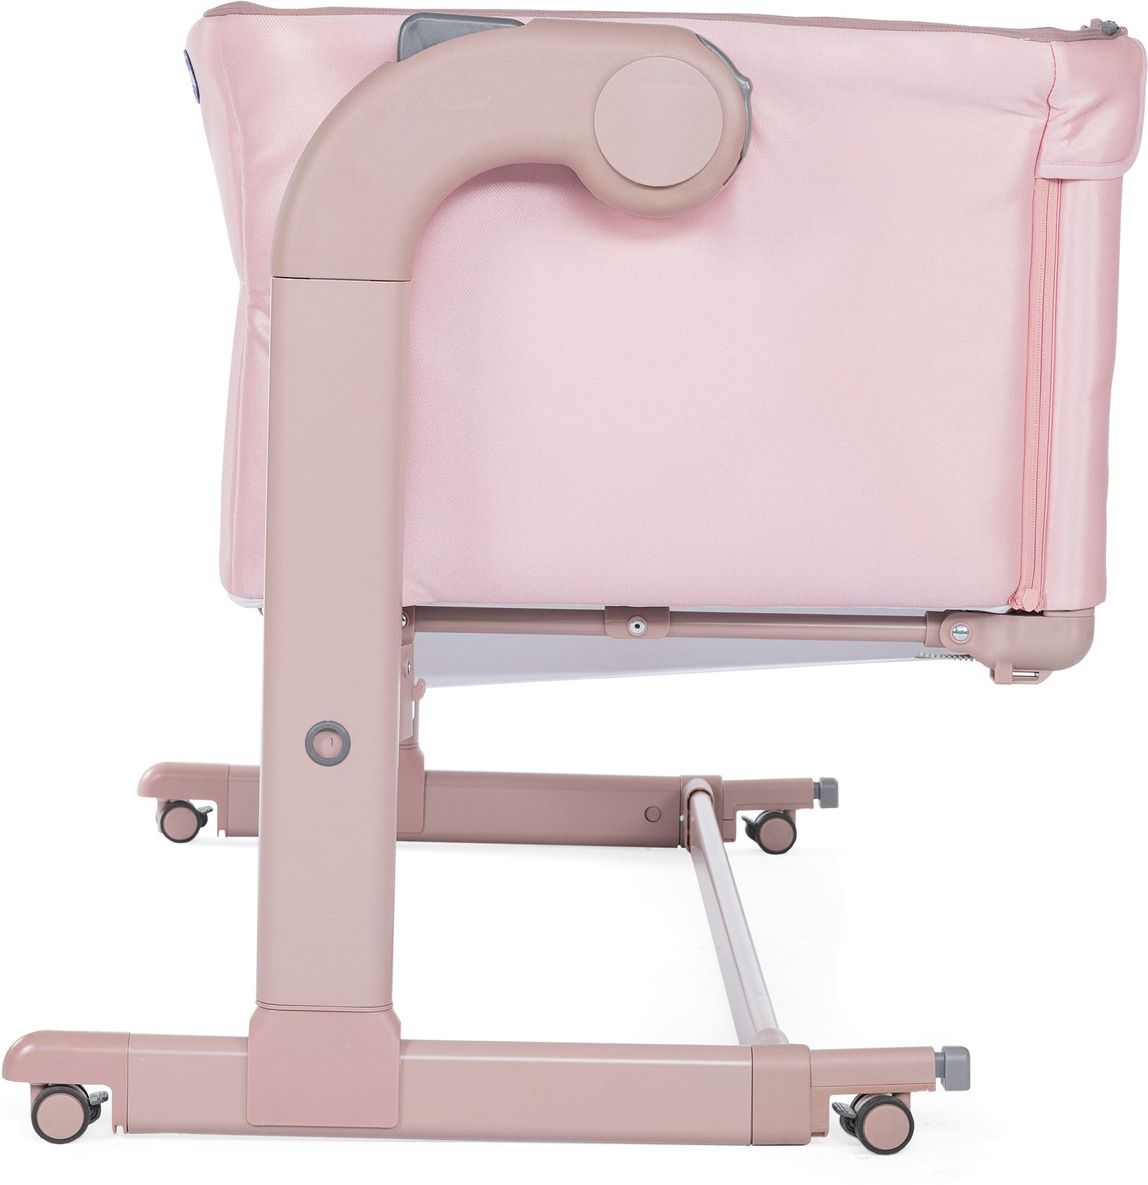   Chicco Next 2 Me Magic Candy Pink